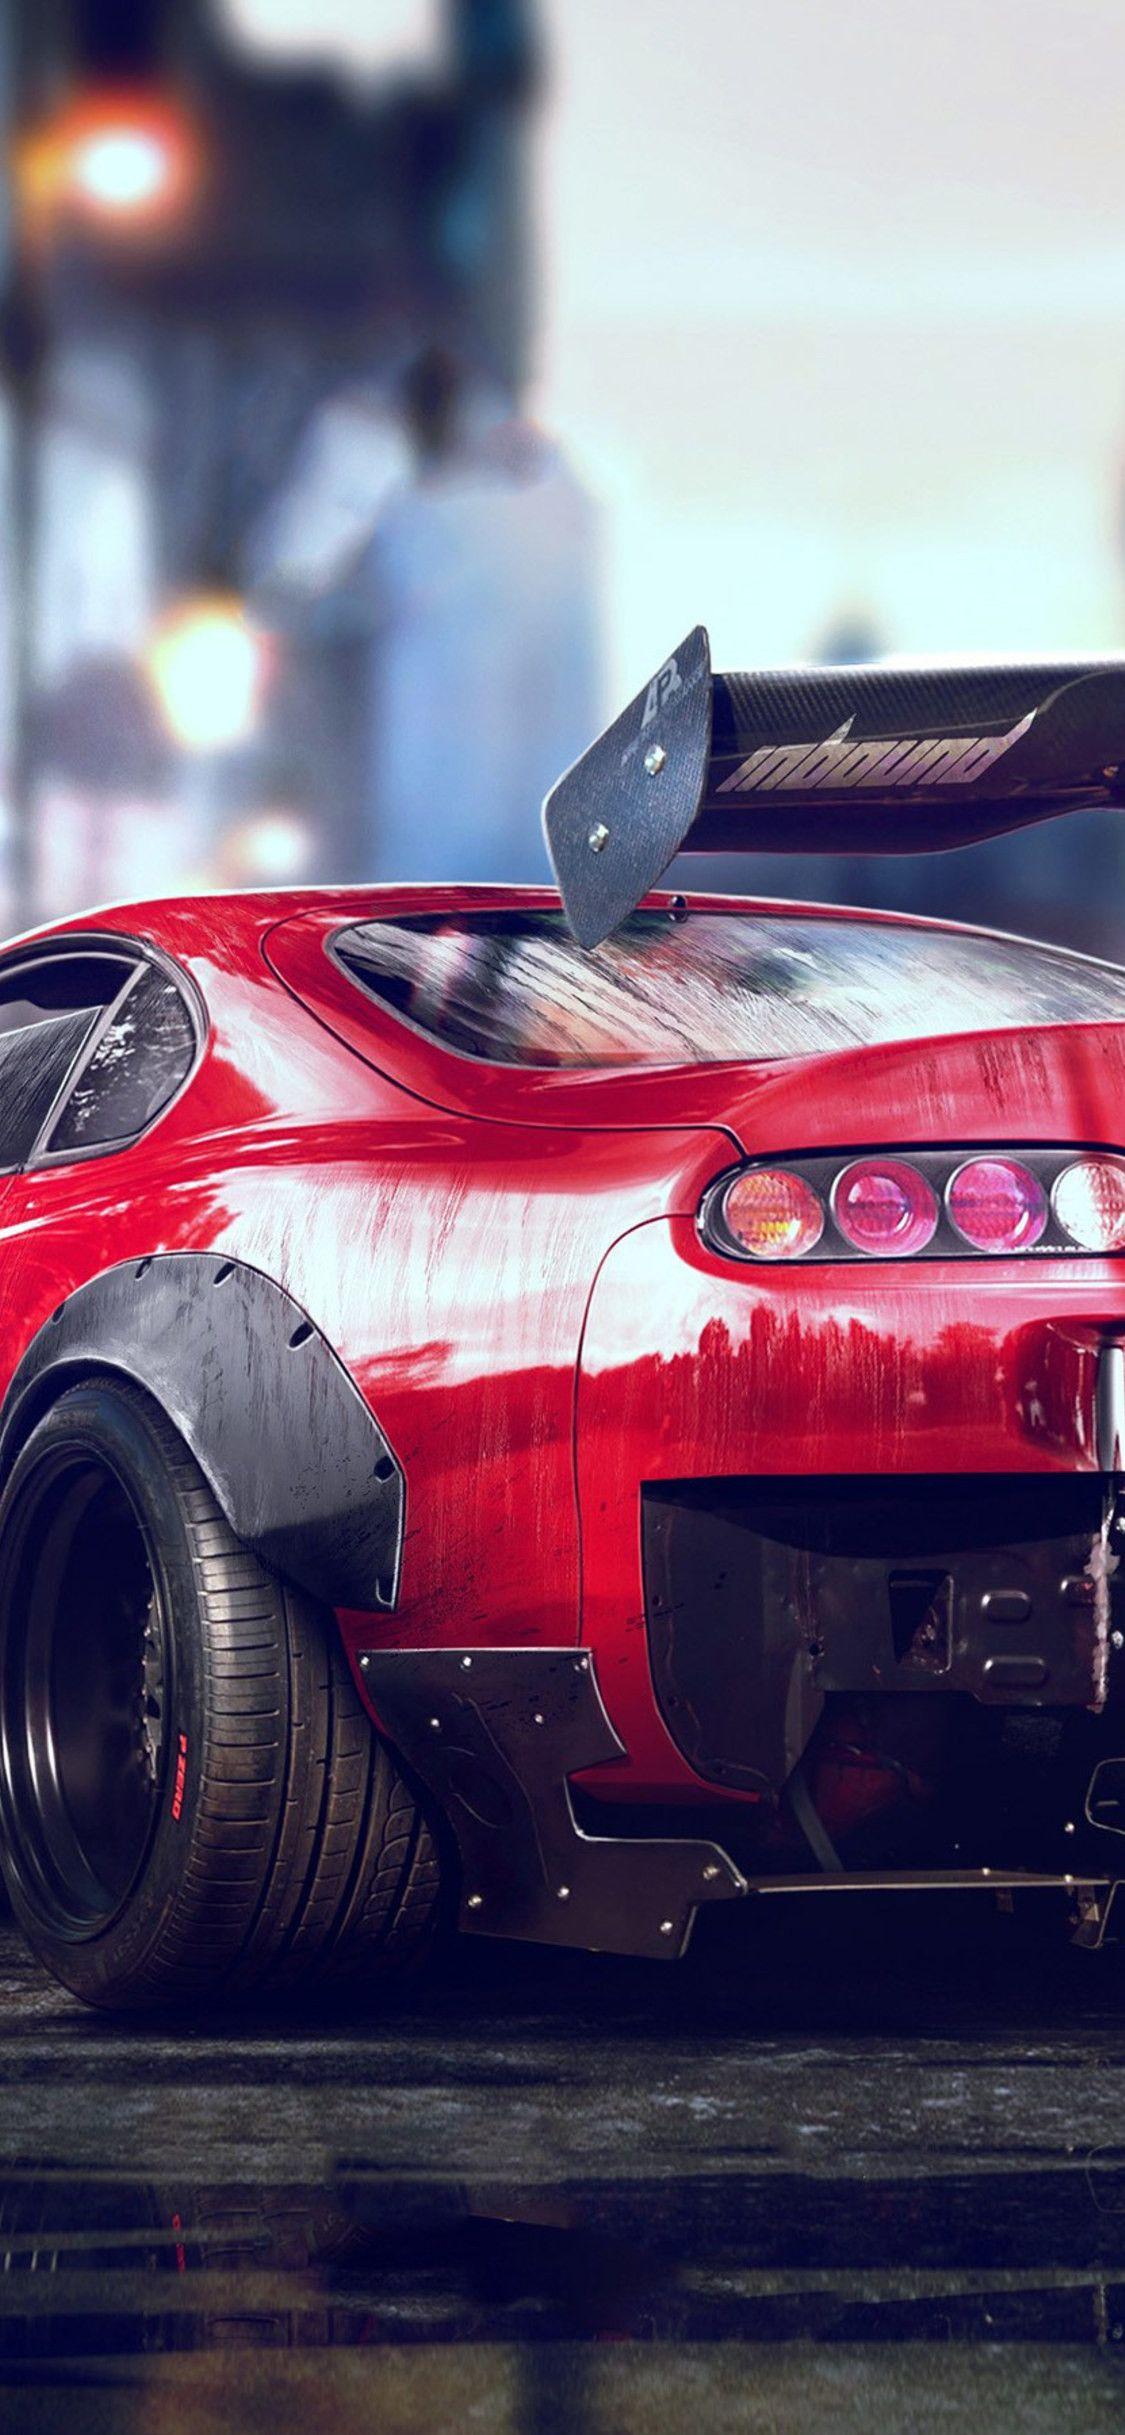 Toyota Supra Wallpaper Iphone Outlet 56 OFF xevietnamcom